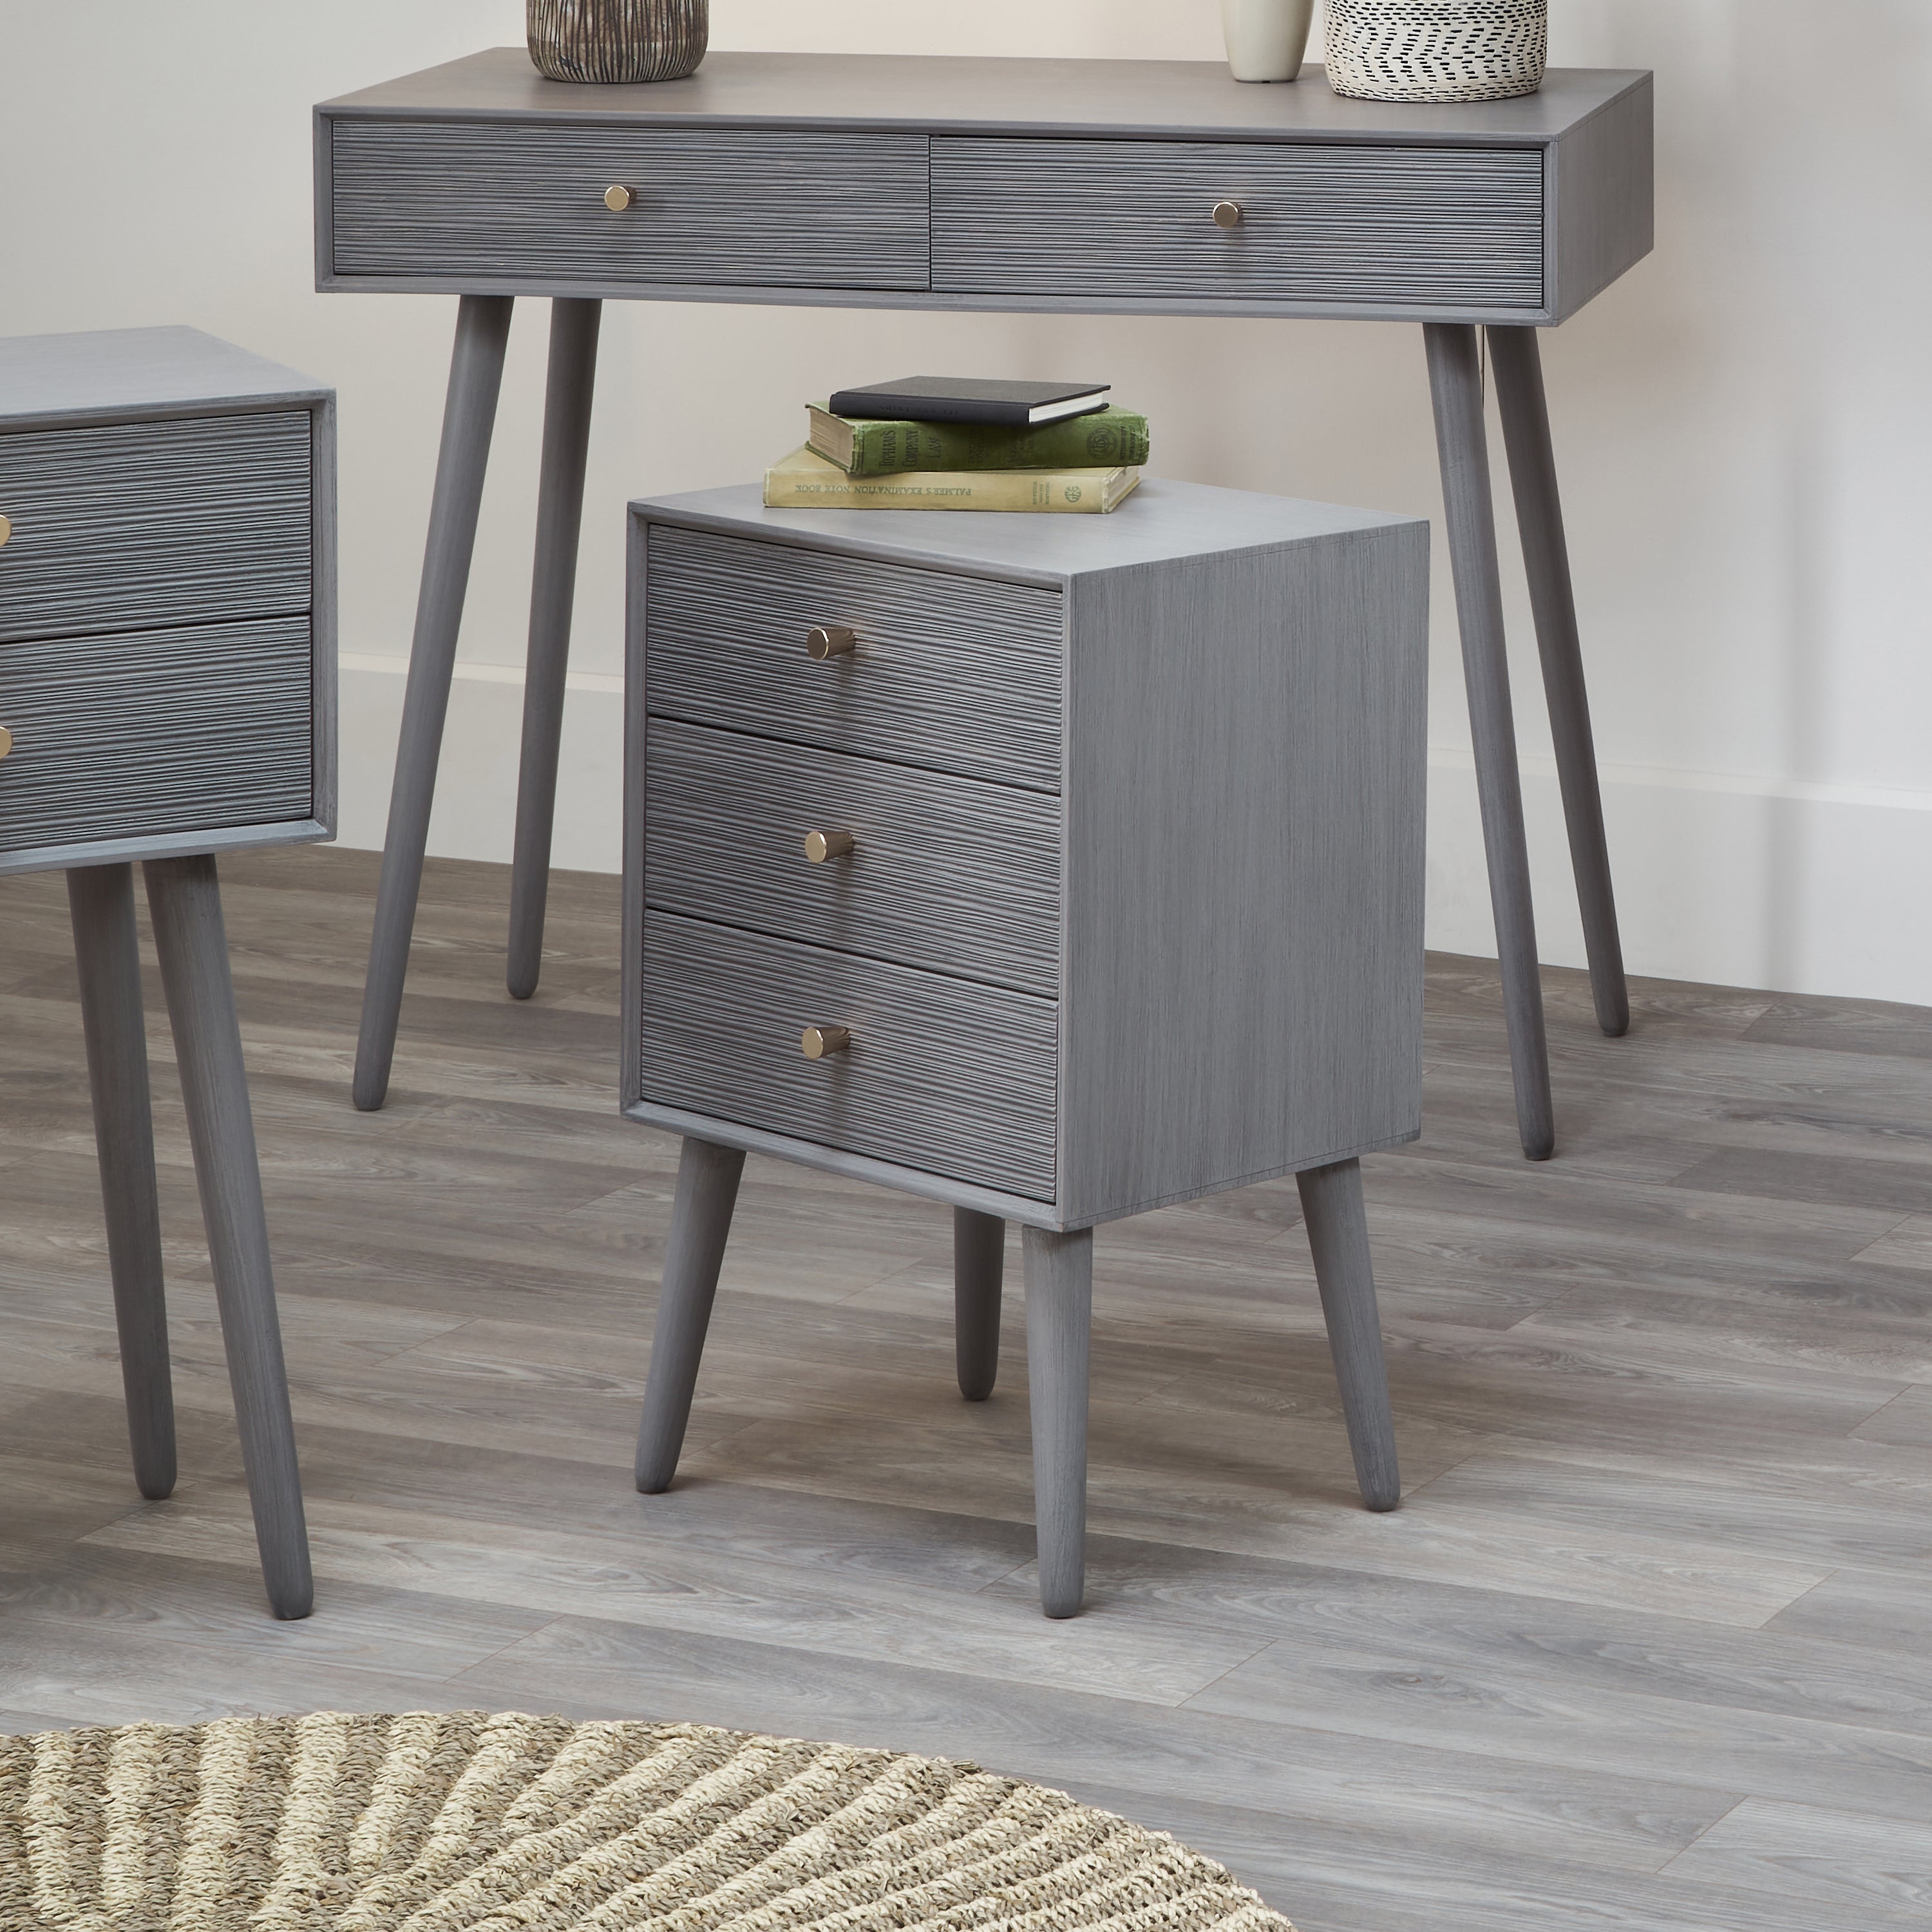 Pacific Chaya 3 Drawer Bedside Table, Grey Pine